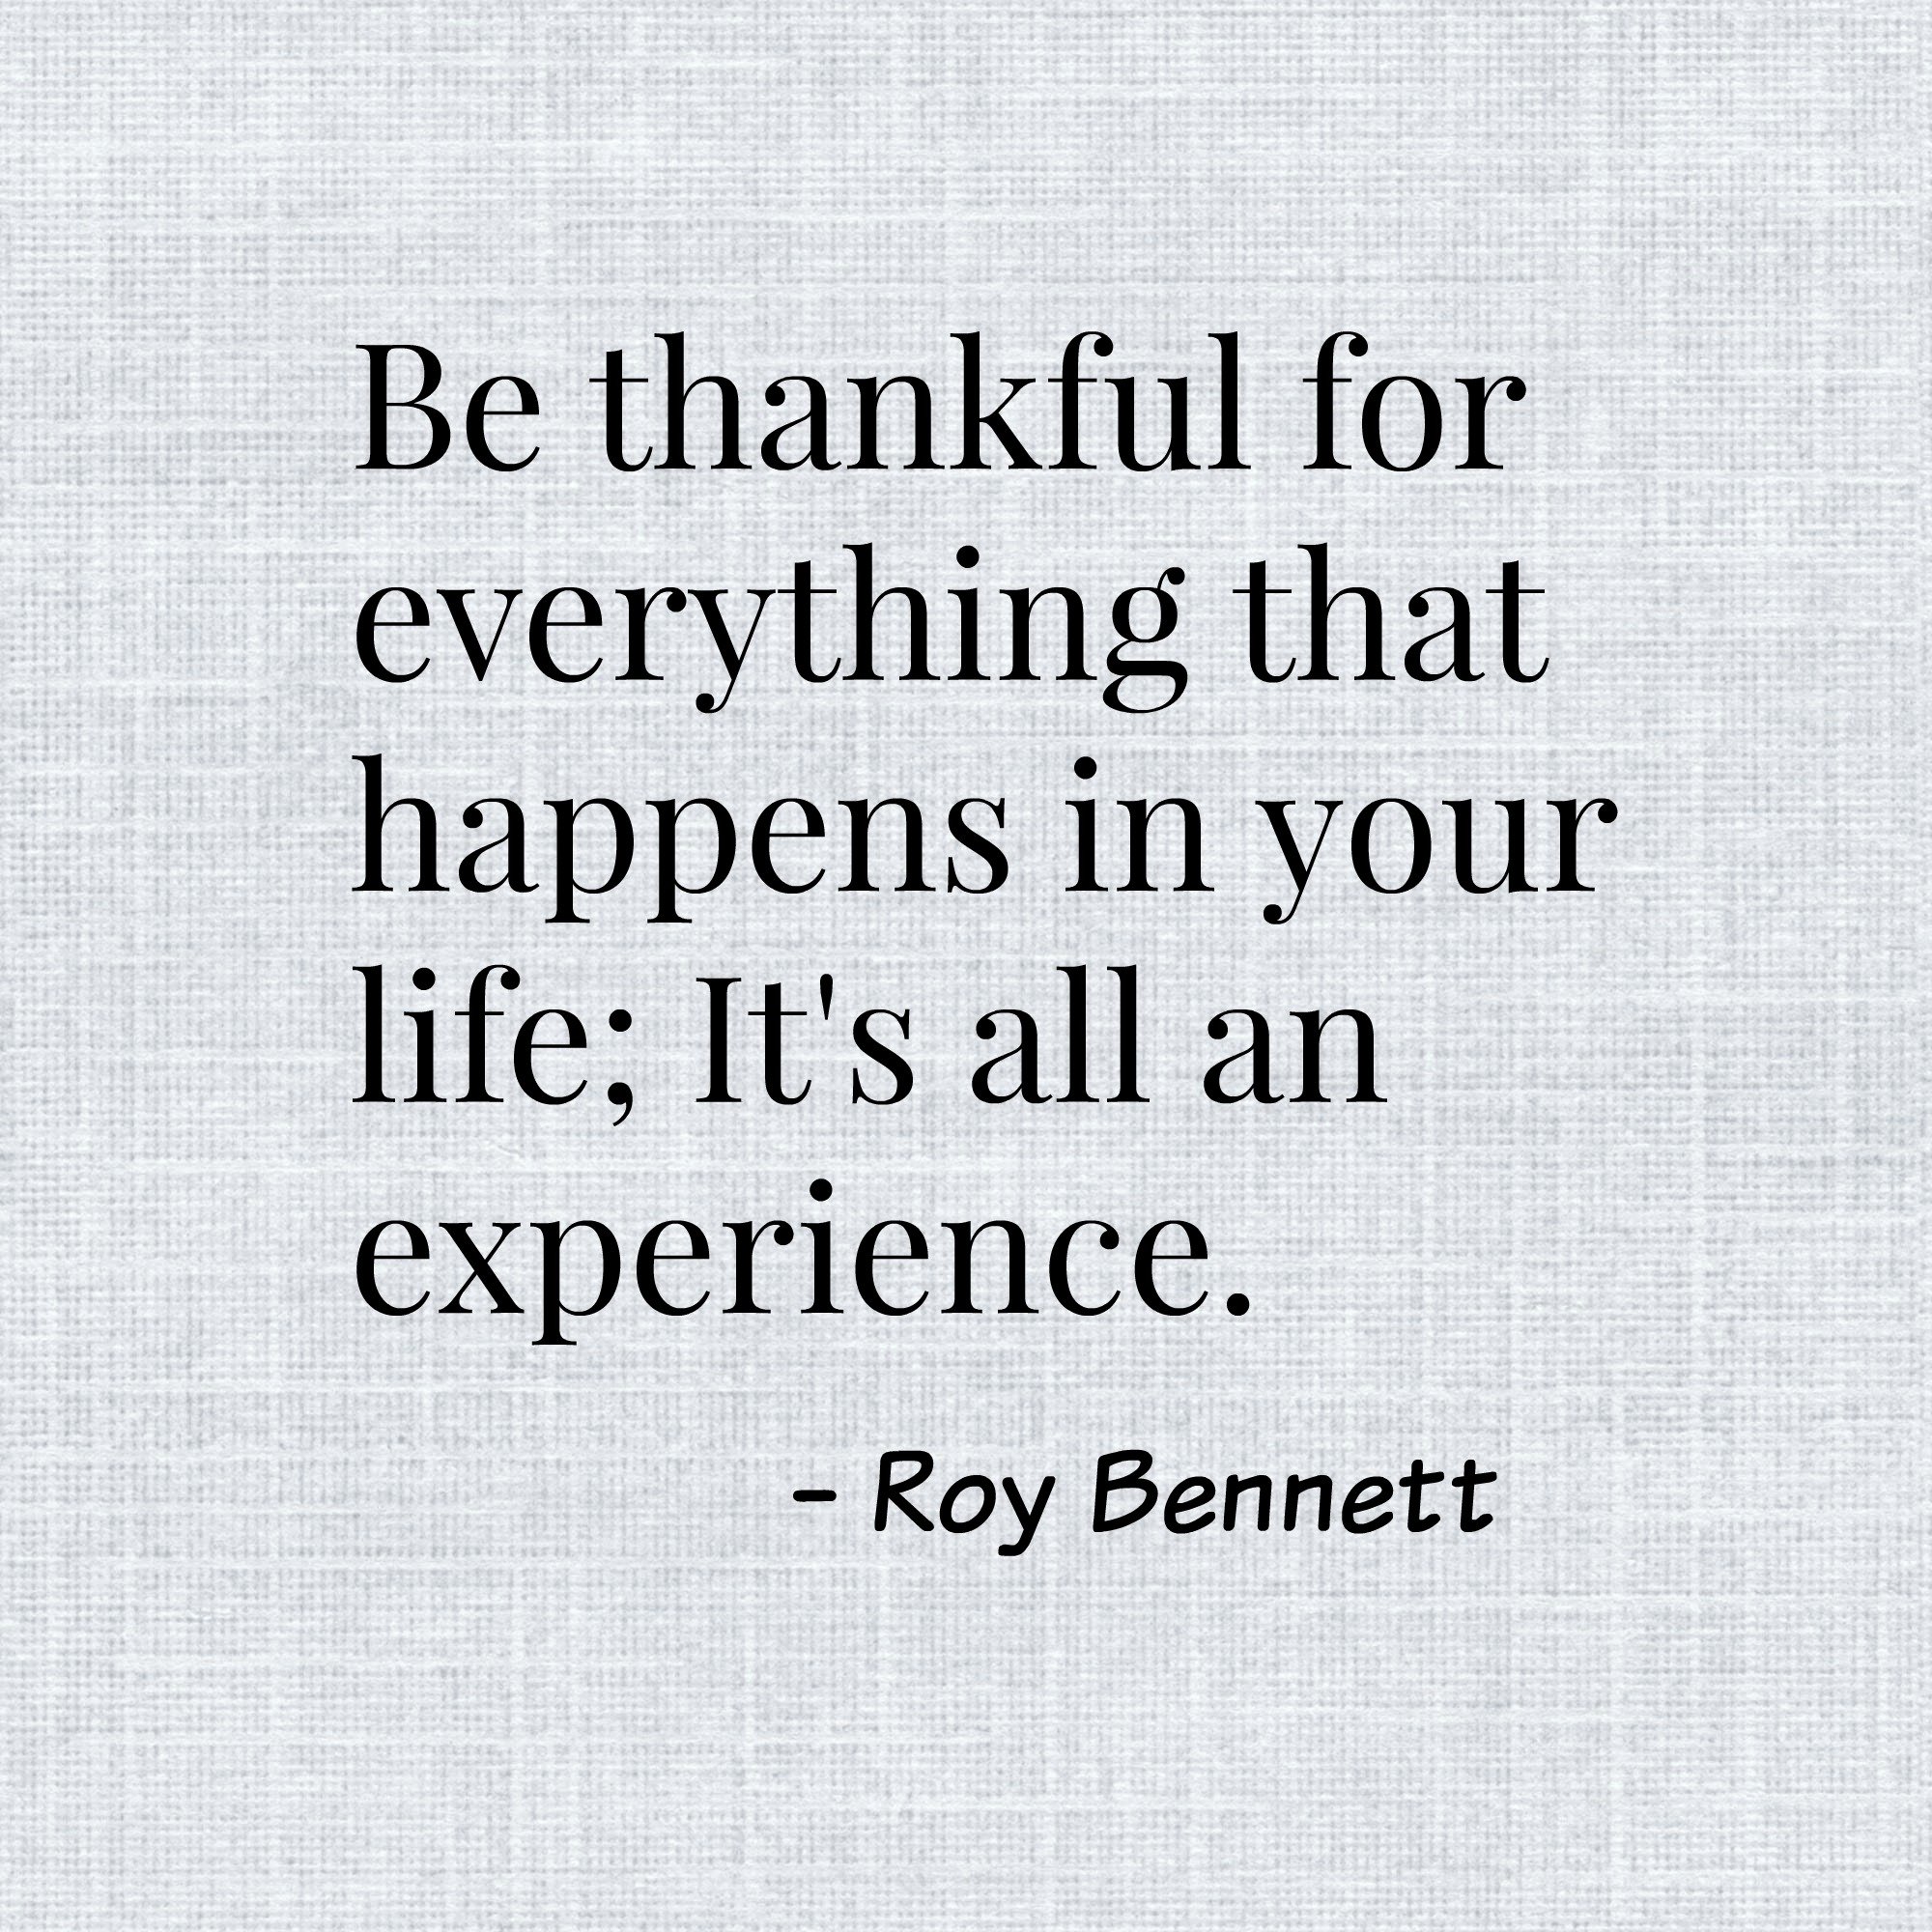 Be thankful for everything that happens in your life; it is all an experience.